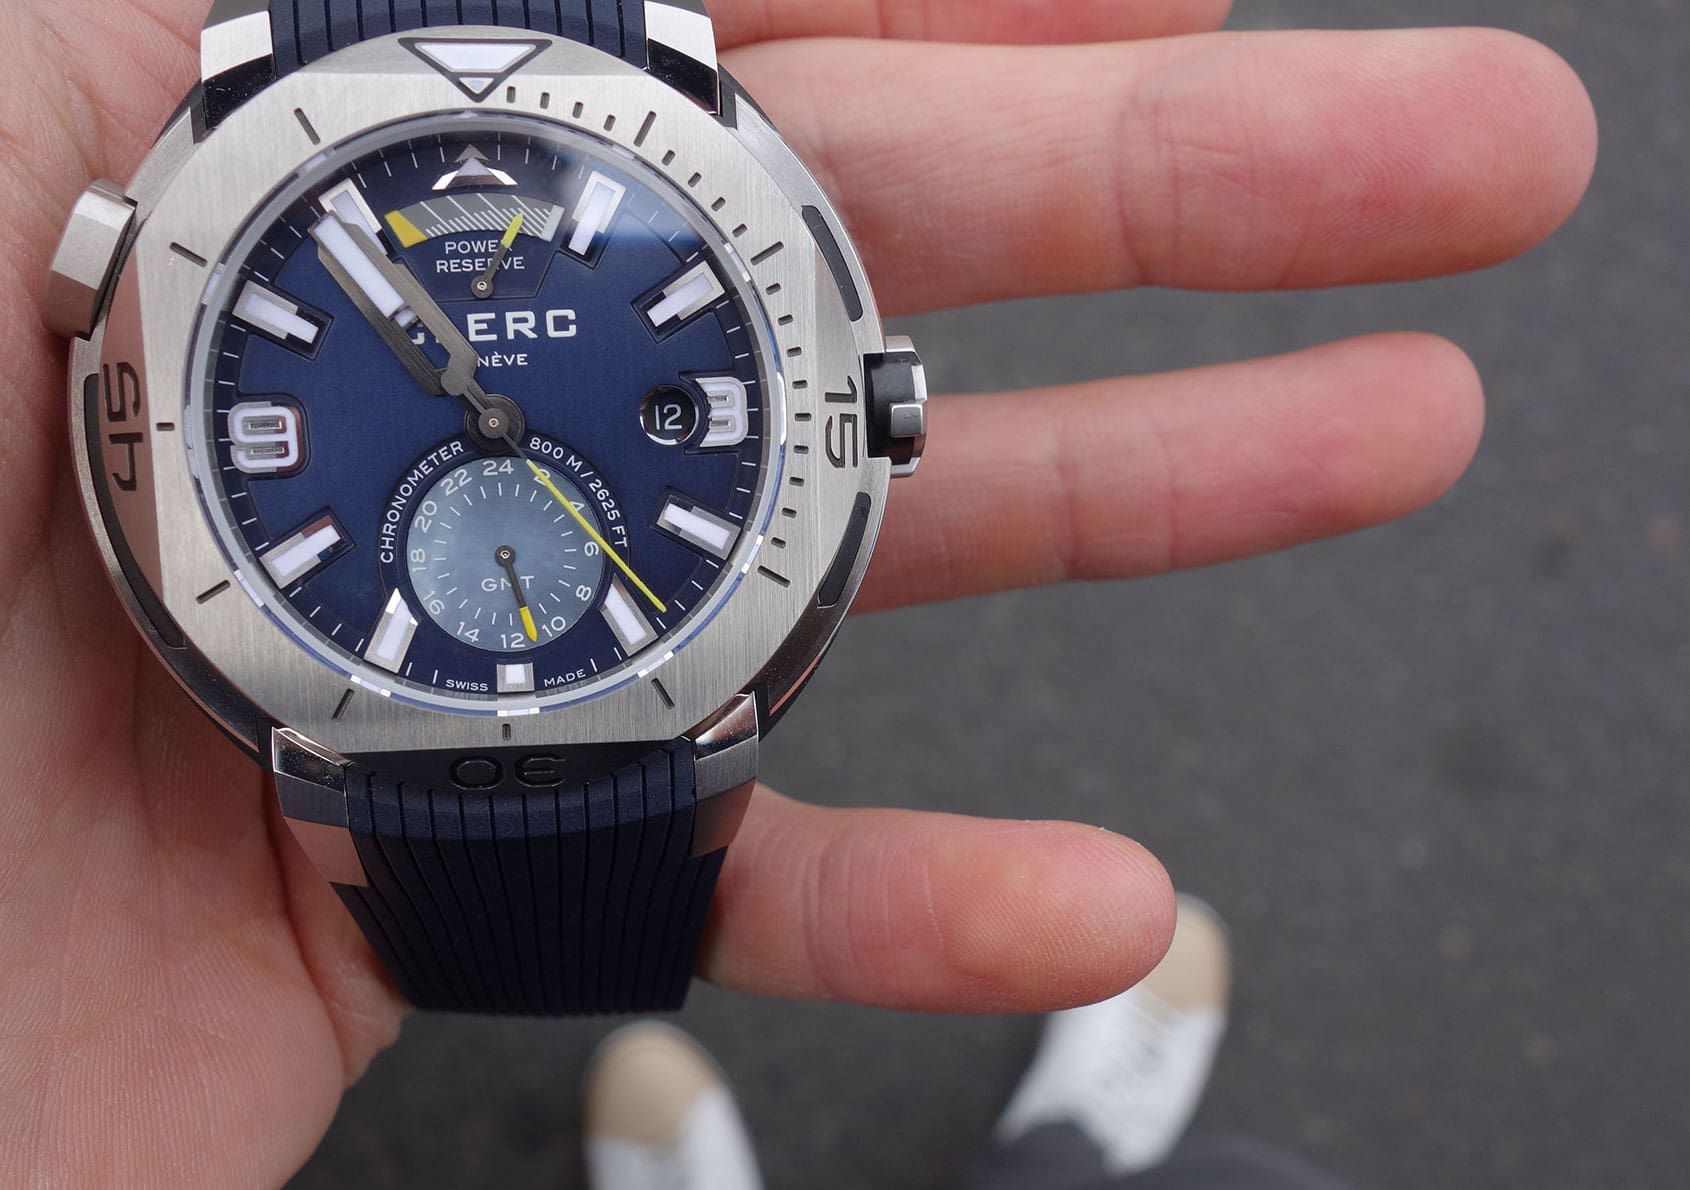 HANDS-ON: The Clerc Hydroscaph GMT Power Reserve